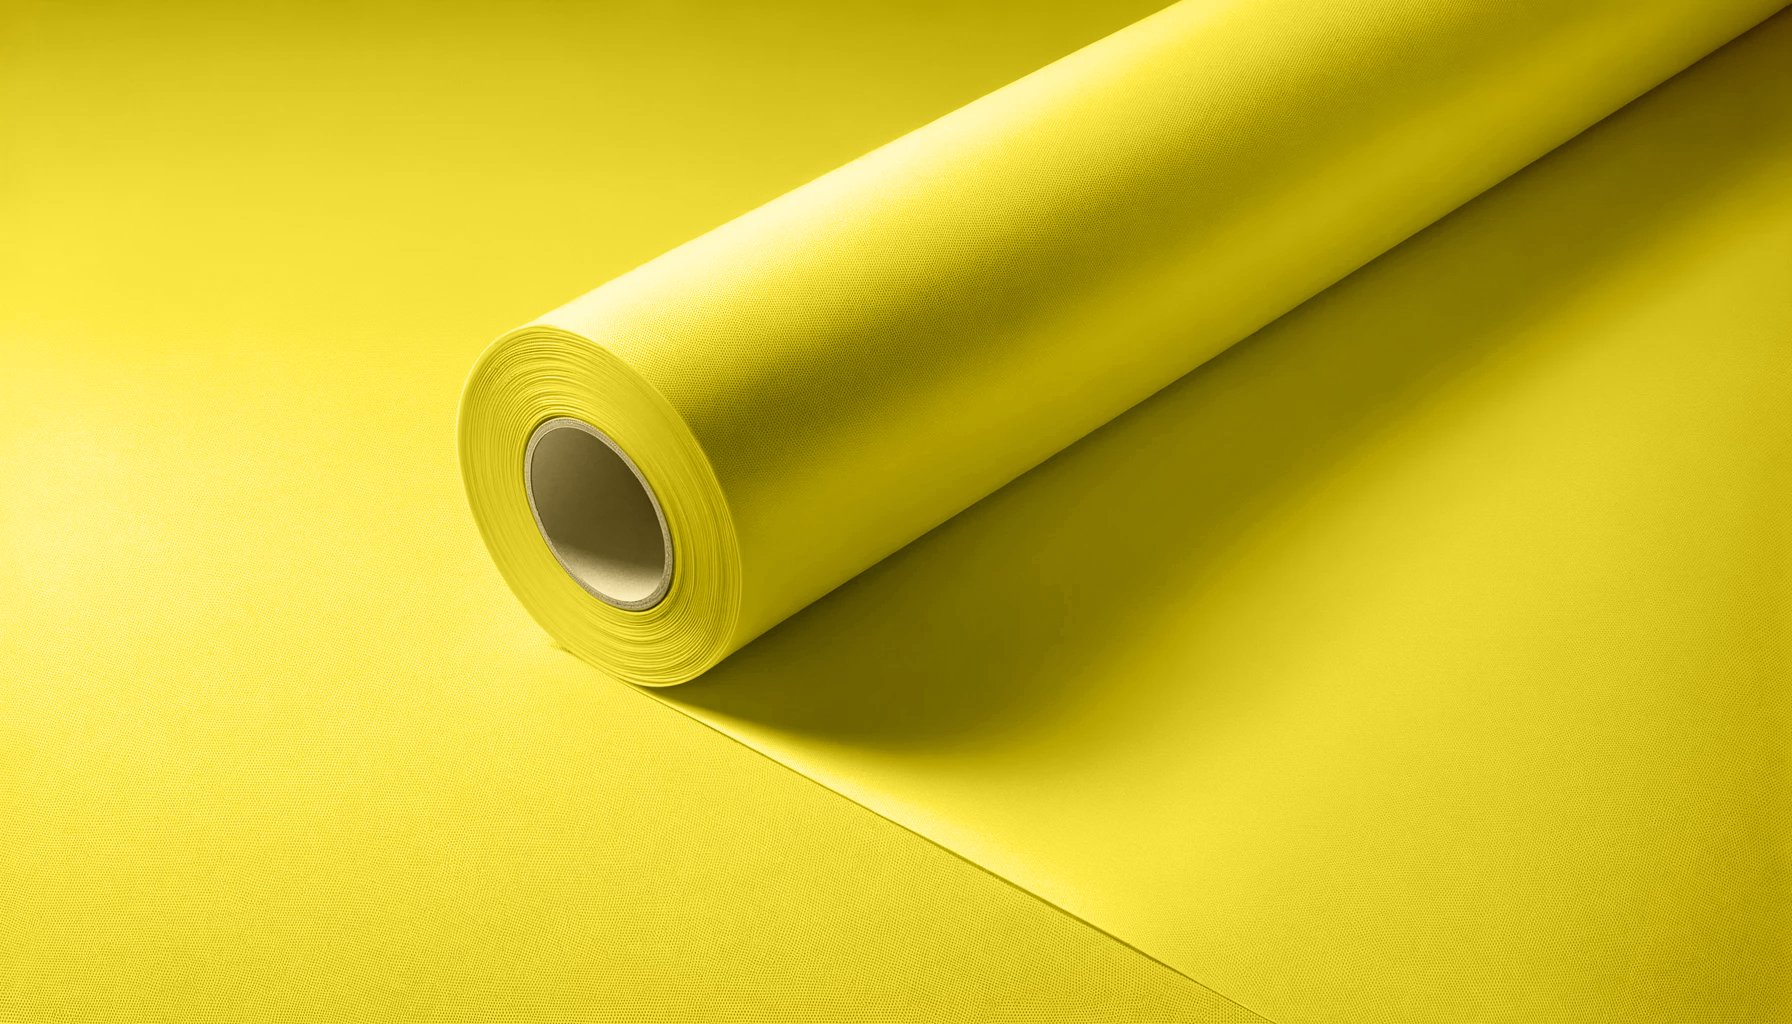 Peel & Stick Removable Re-usable Paint - Color RAL 1016 Sulfur Yellow - offRAL™ - RALRAW LLC, USA